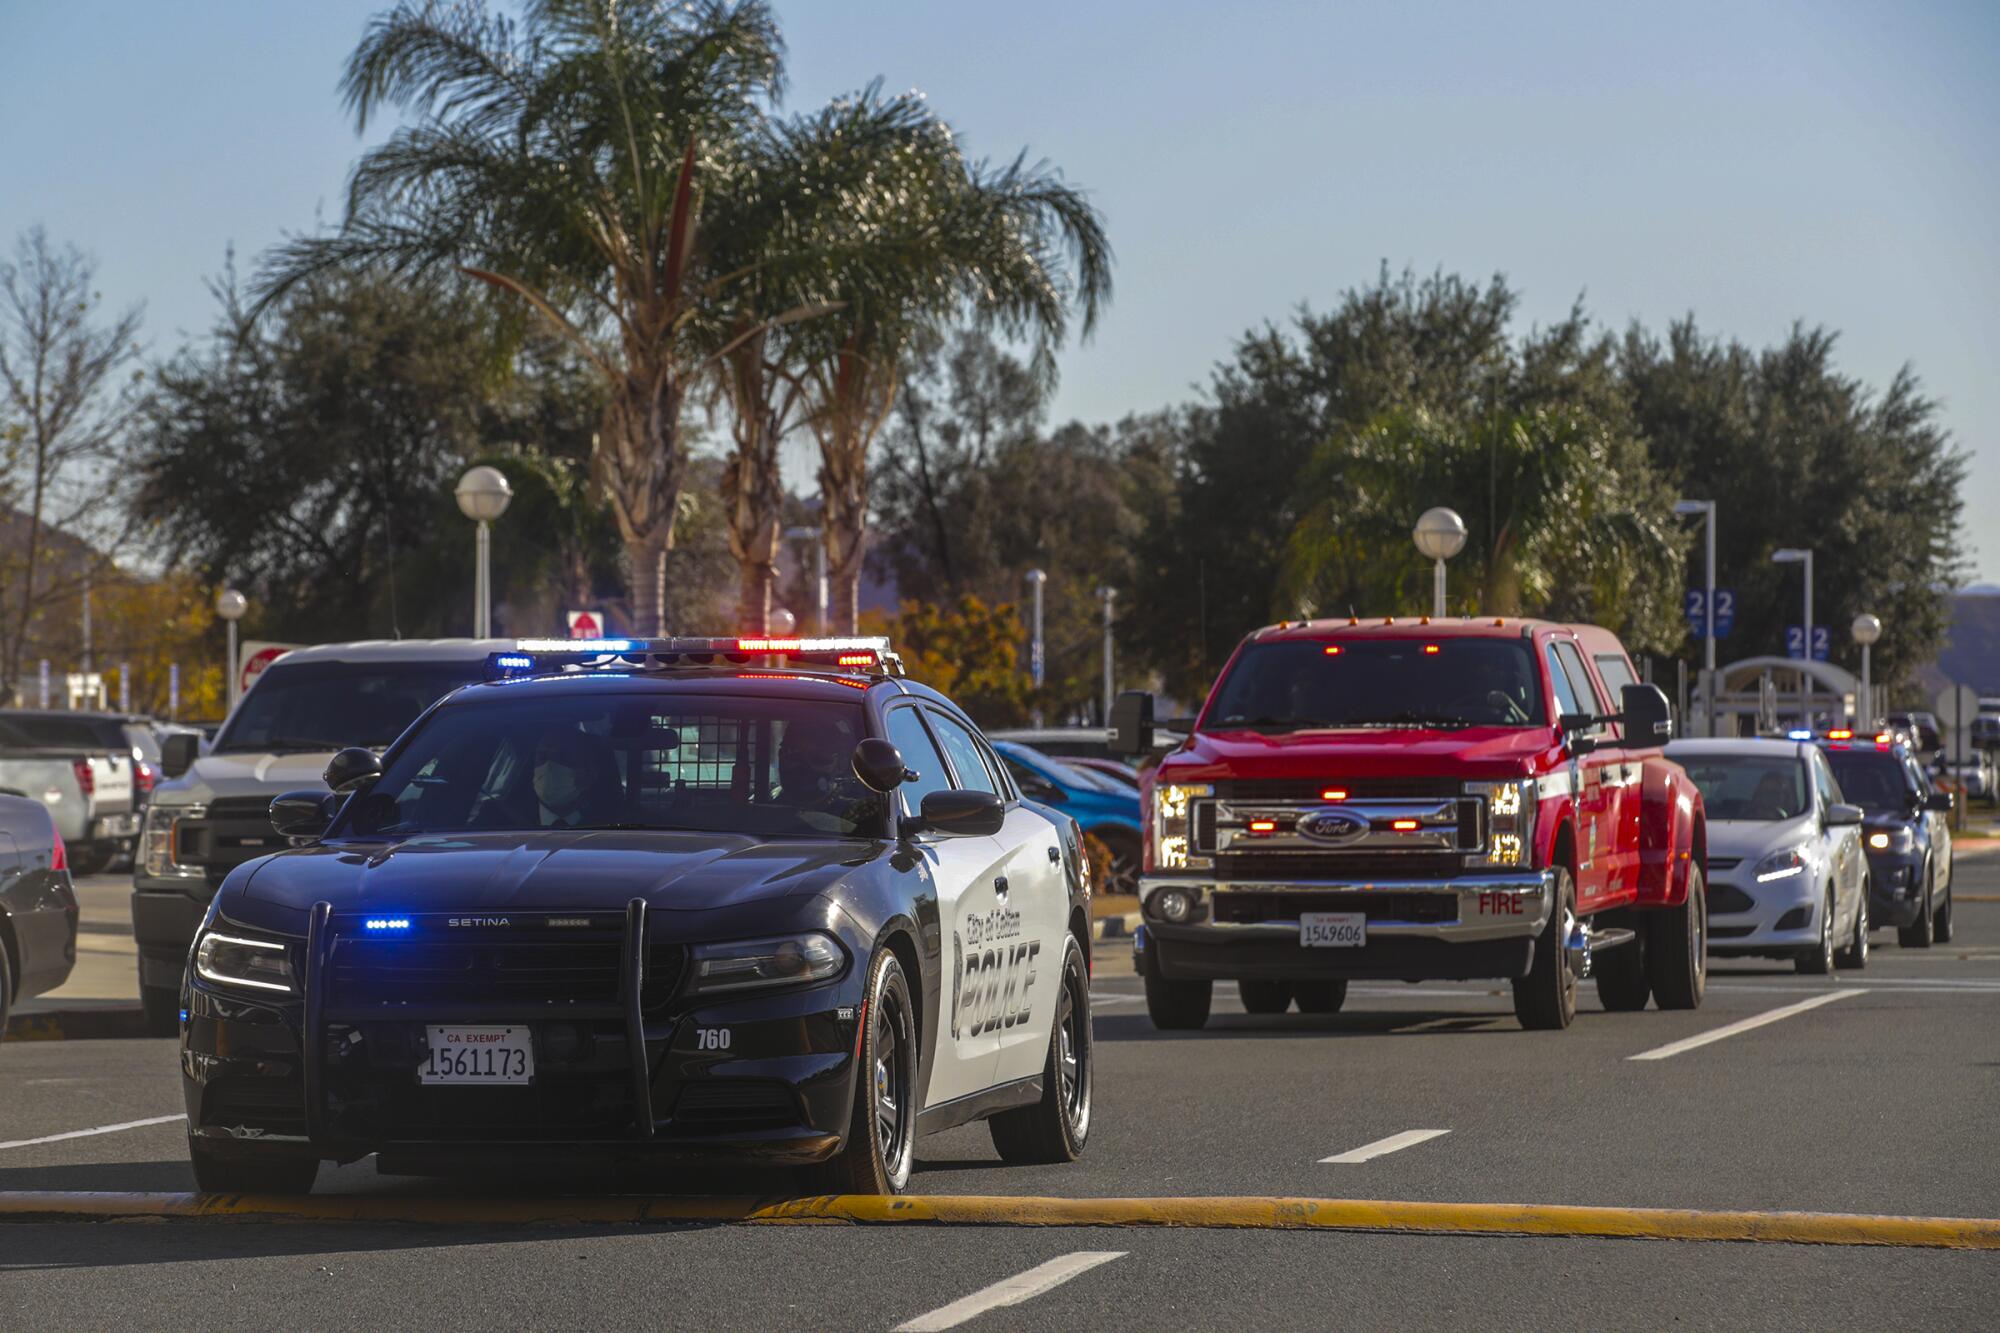 Escorting police cars bookend a fire department pickup truck carrying vaccine doses